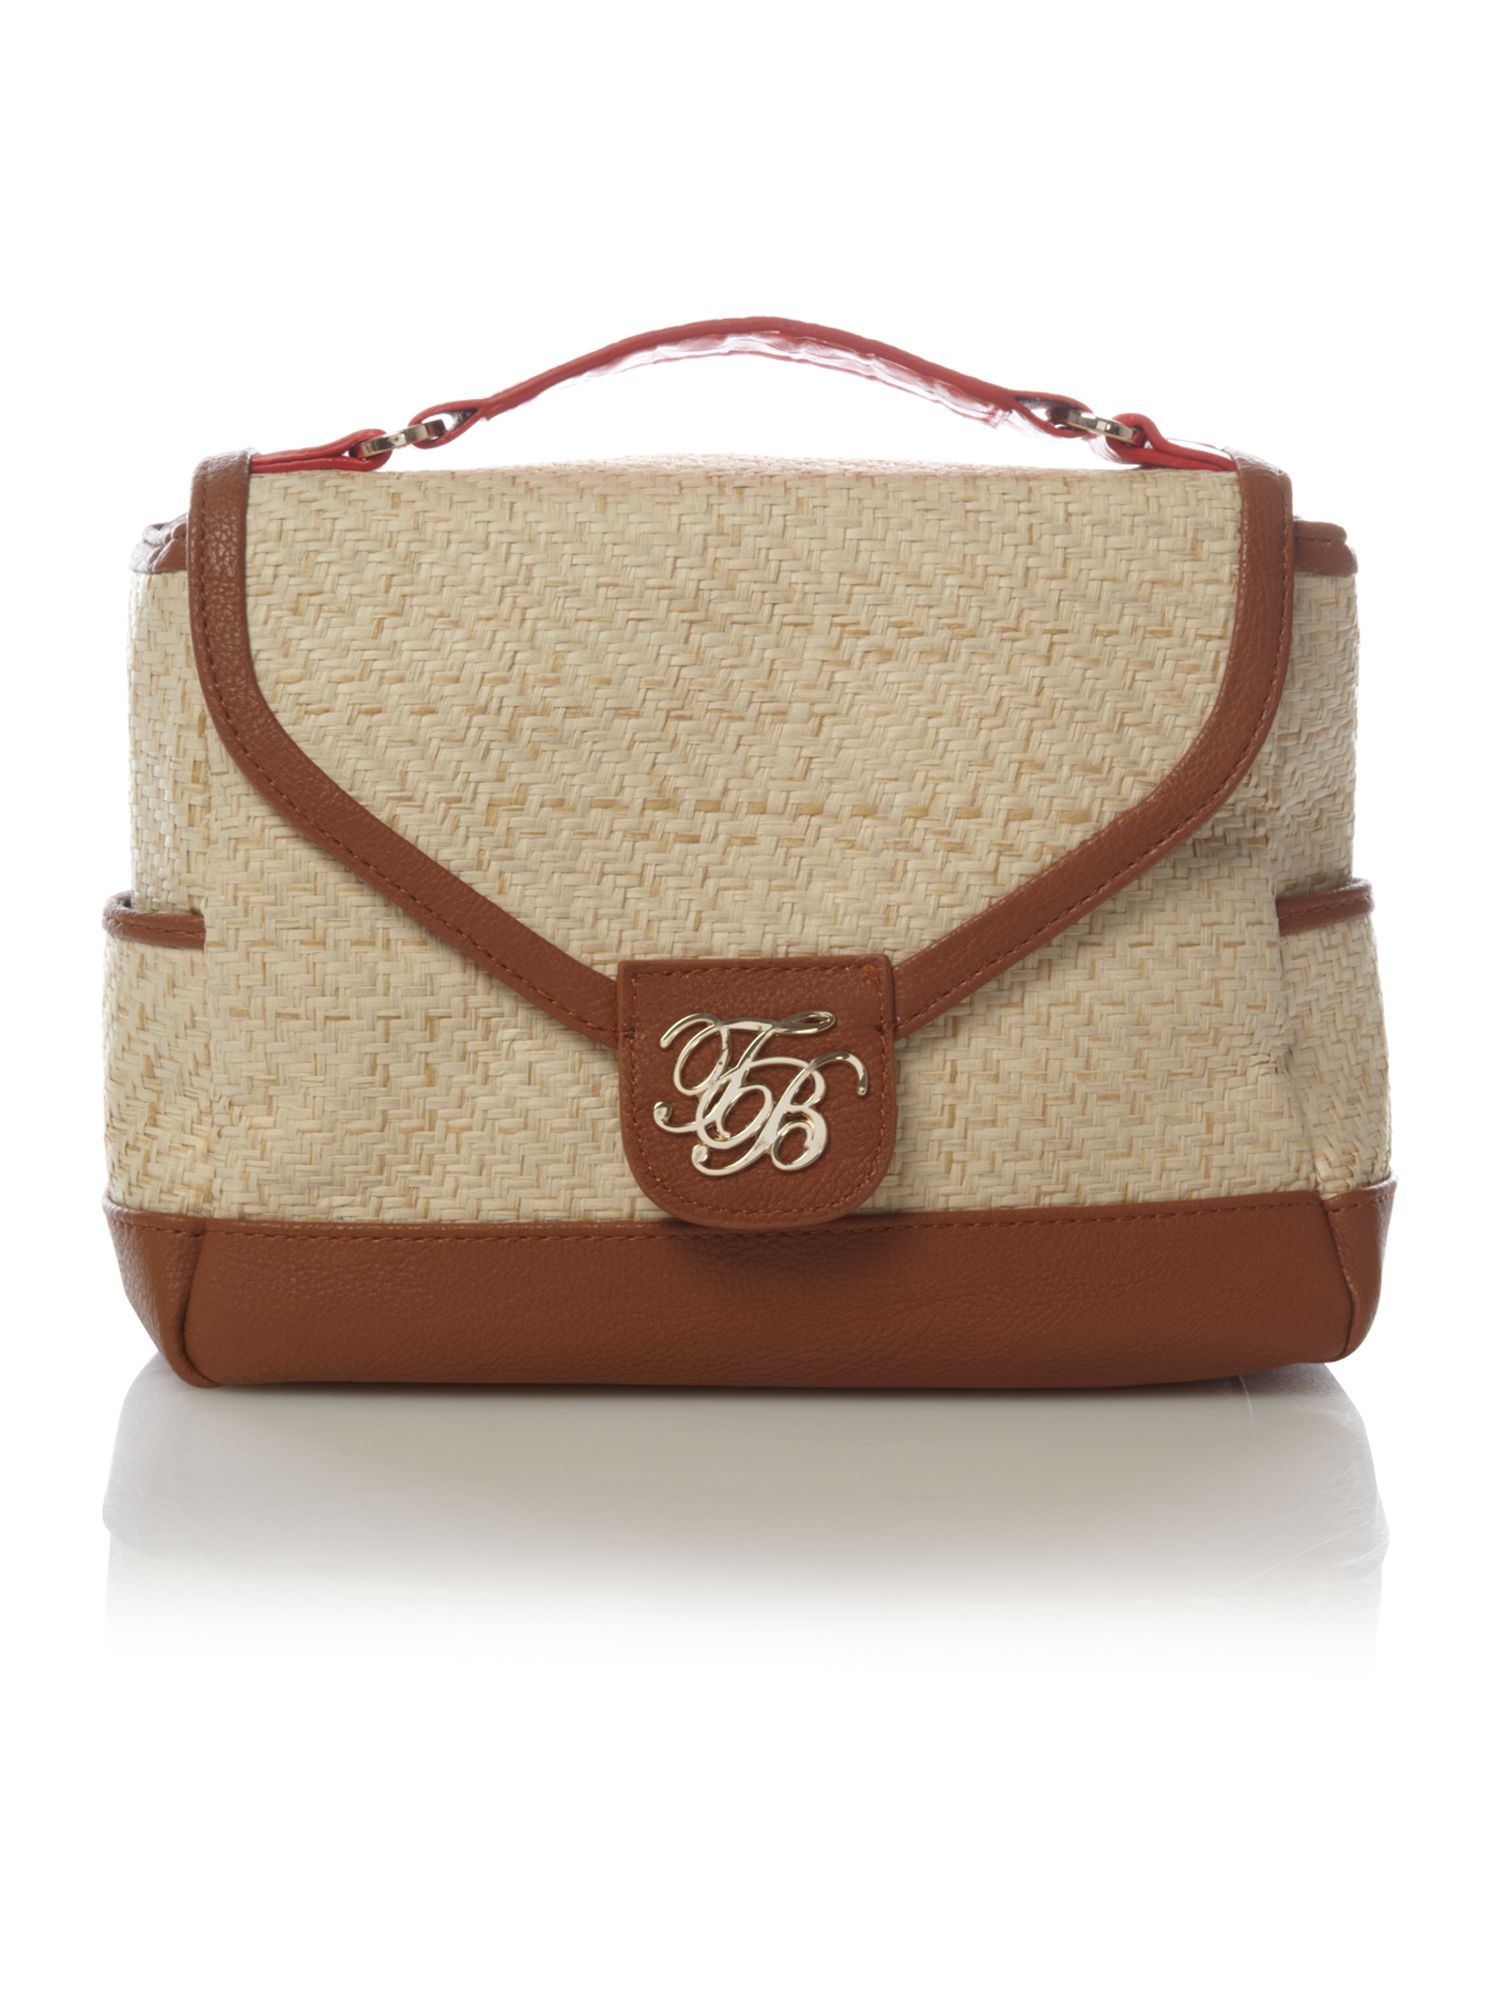 Ted Baker Straw Flapover Crossbody Bag in Beige (natural) | Lyst